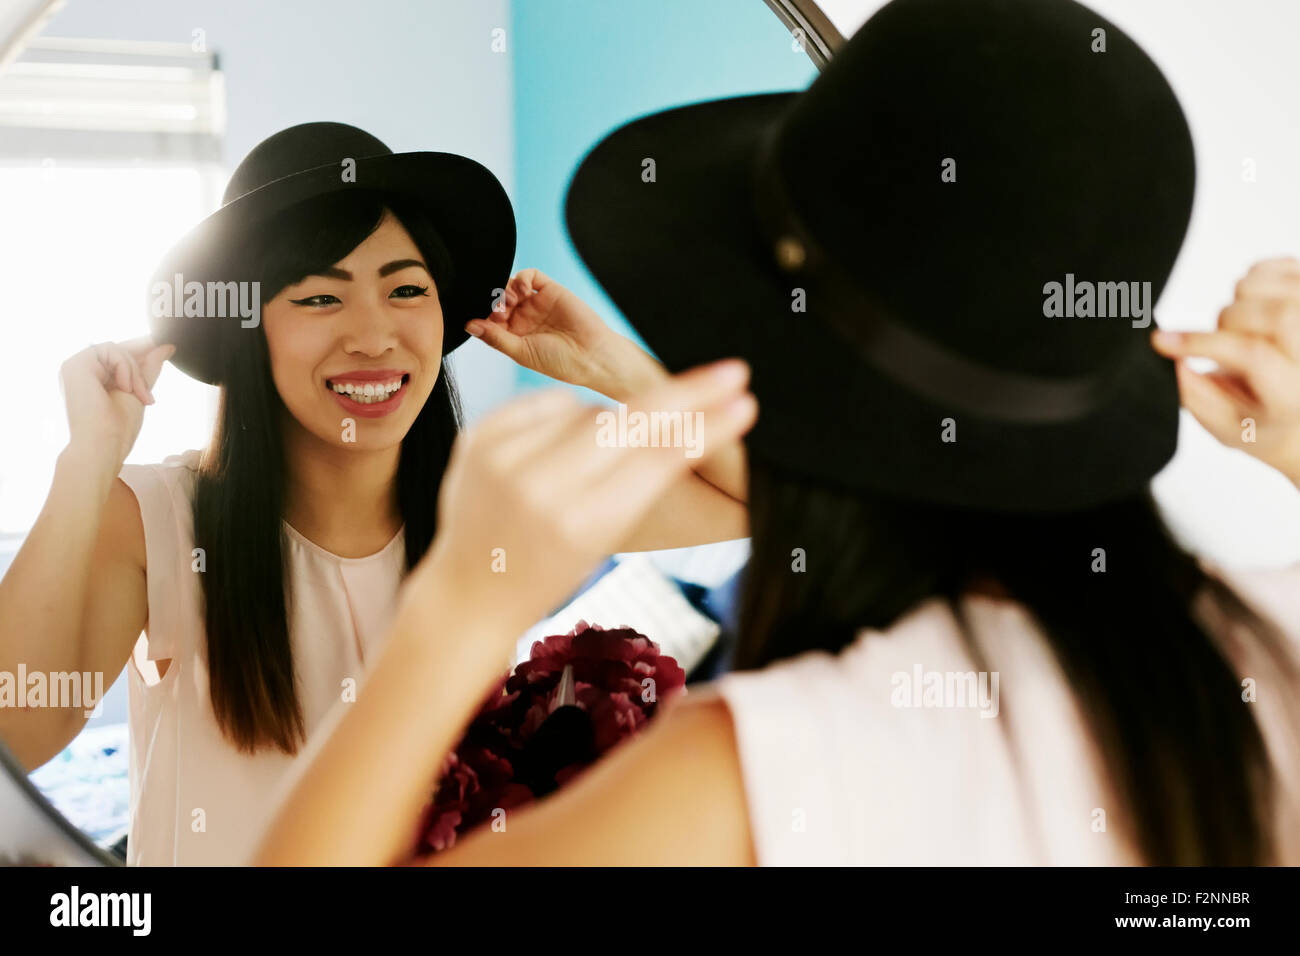 Japanese woman adjusting hat in mirror Stock Photo